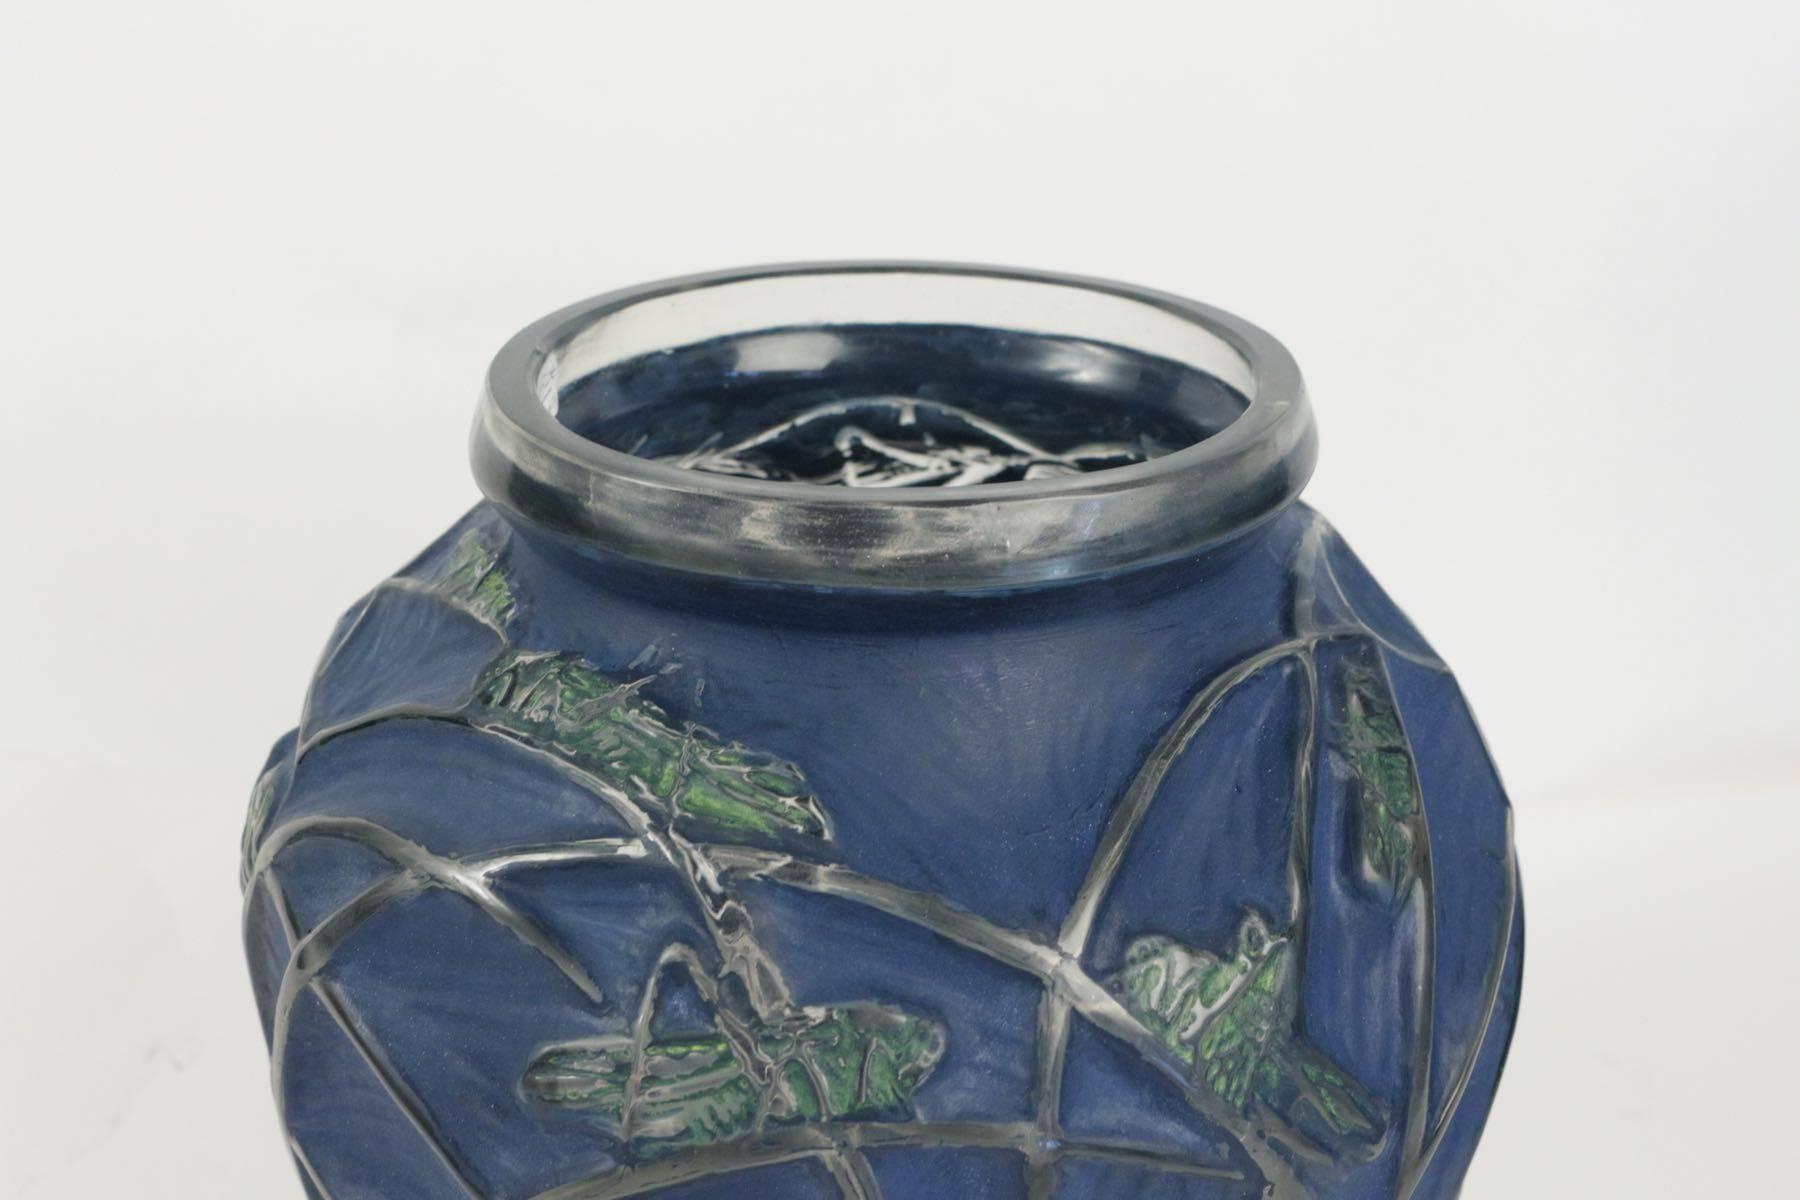 Rene Lalique vase Sauterelles 
model created in 1912.
Measures: 27 cm tall glass with a design of grasshoppers on stems highlighted by blue and green patina R. Lalique Vase Alique Rene´ (1860-1945). Vase 